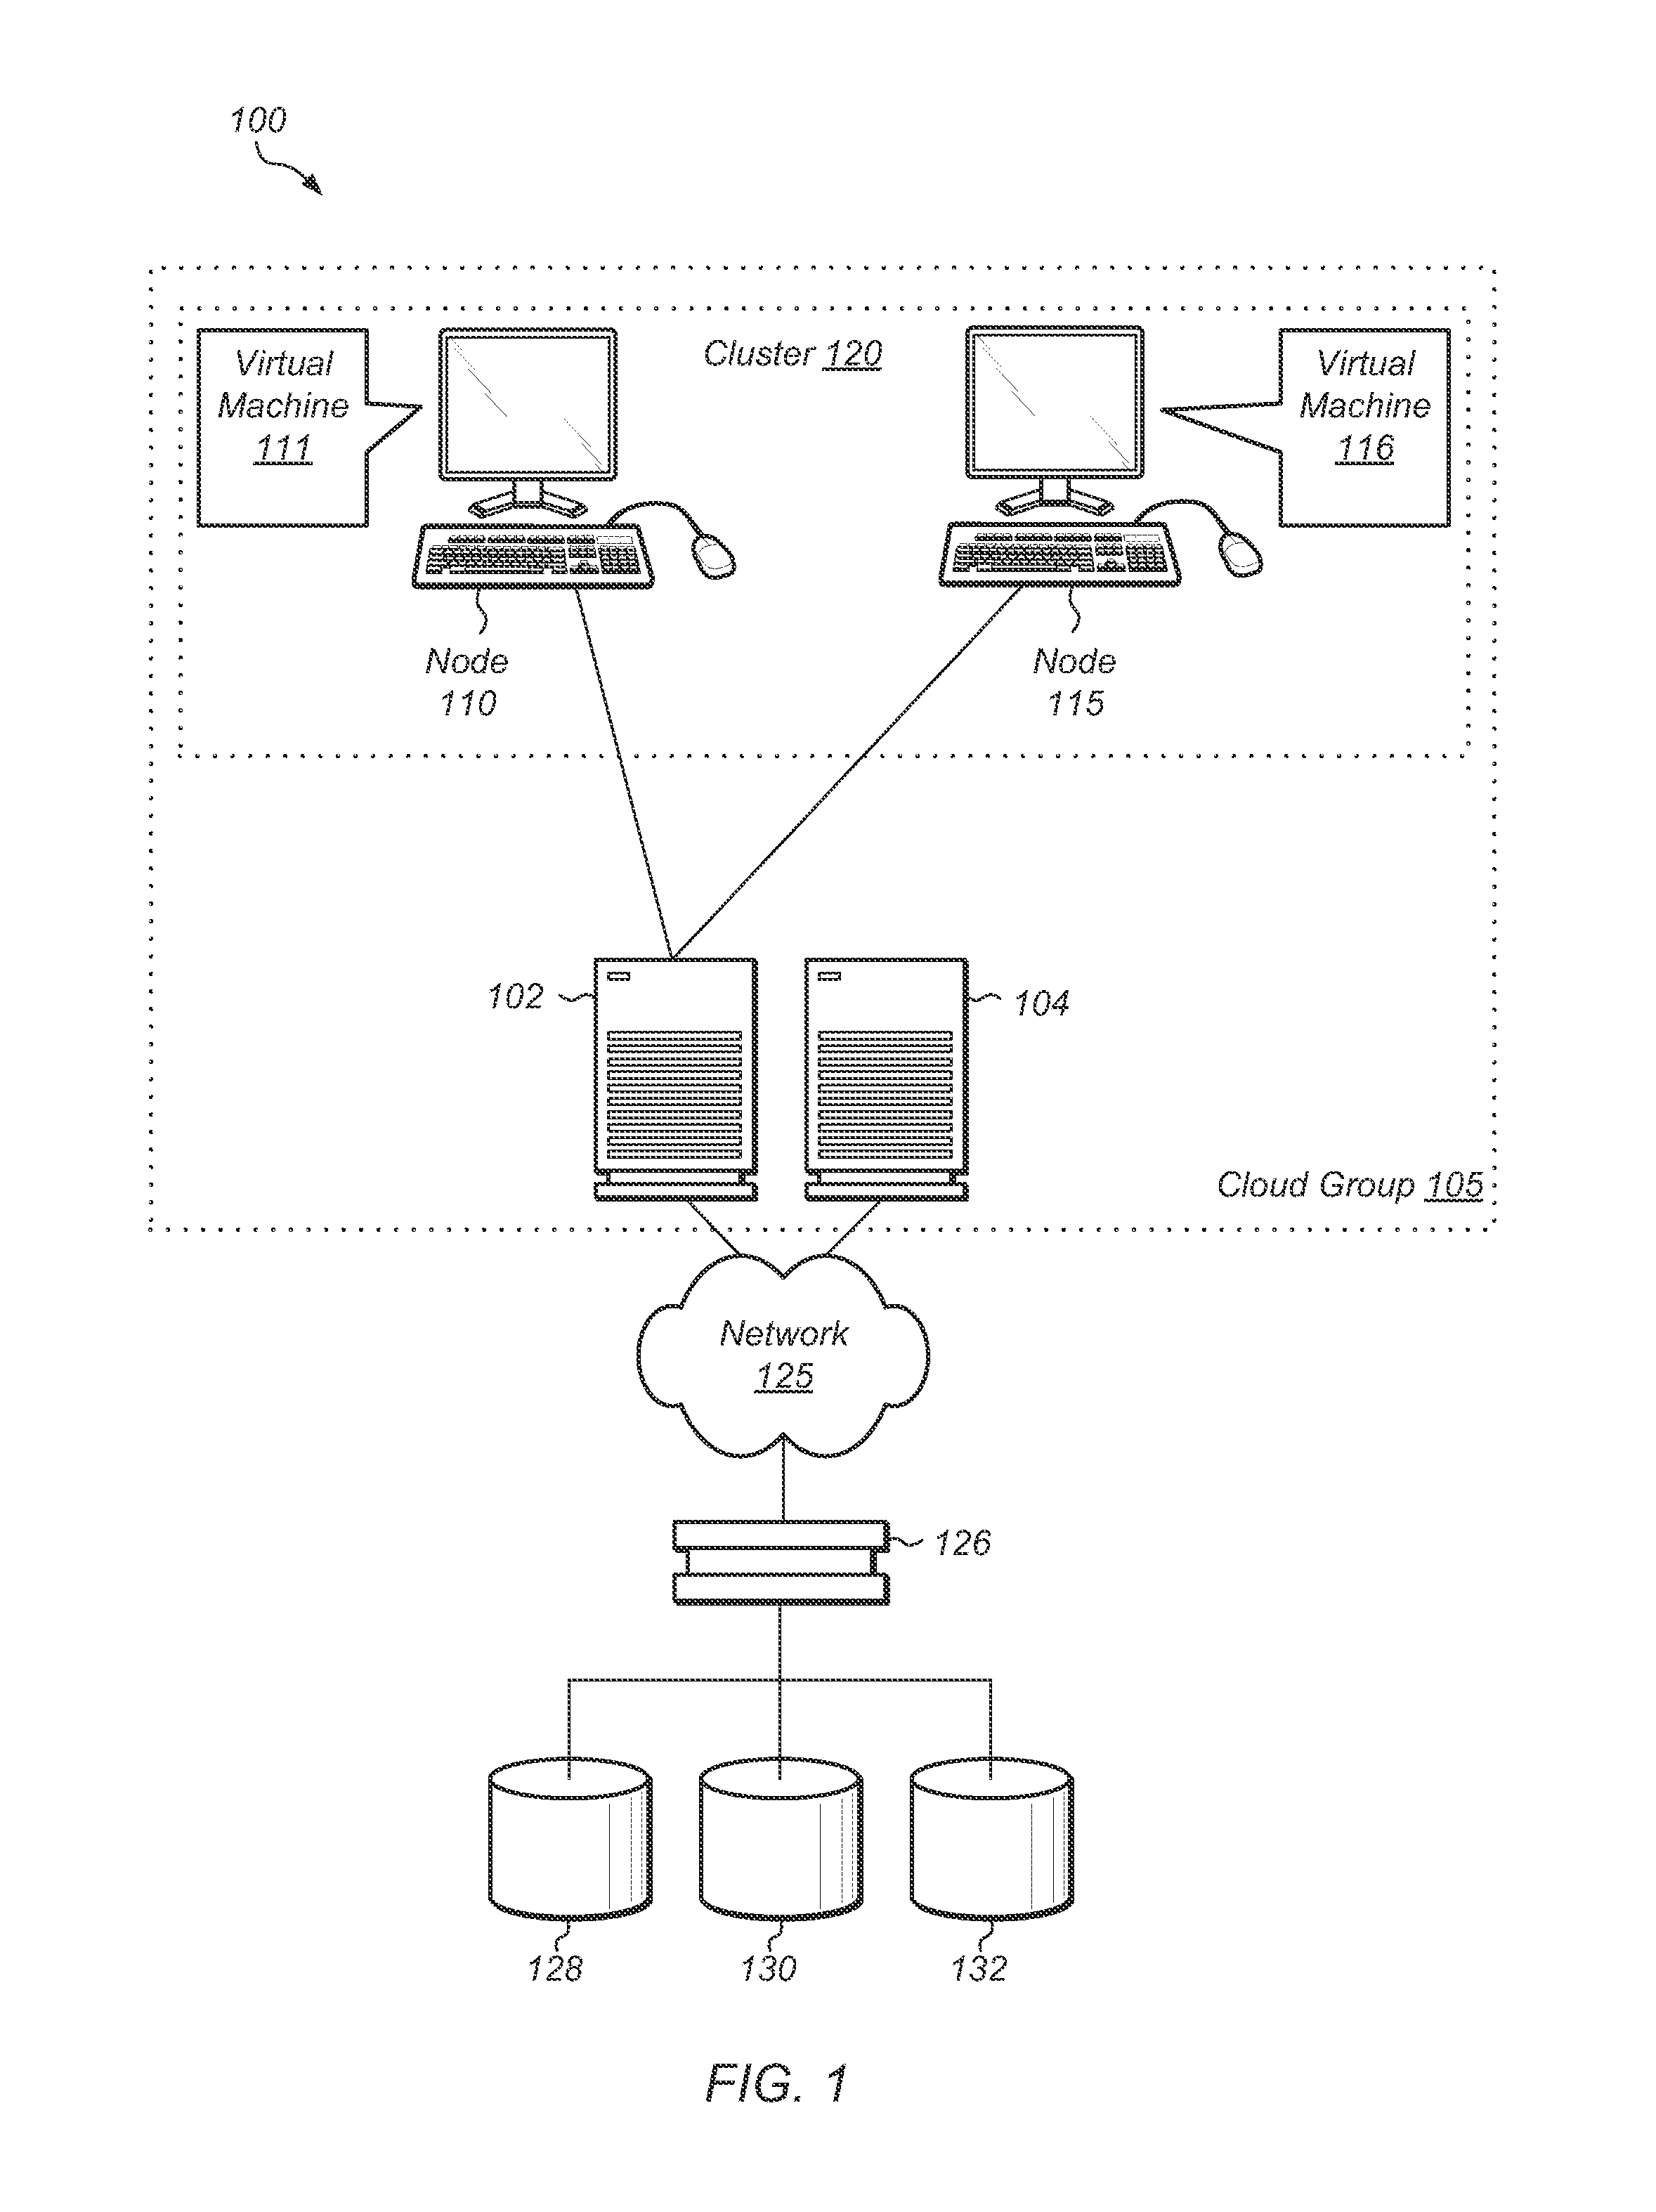 Method and system to visually represent the status of a data center